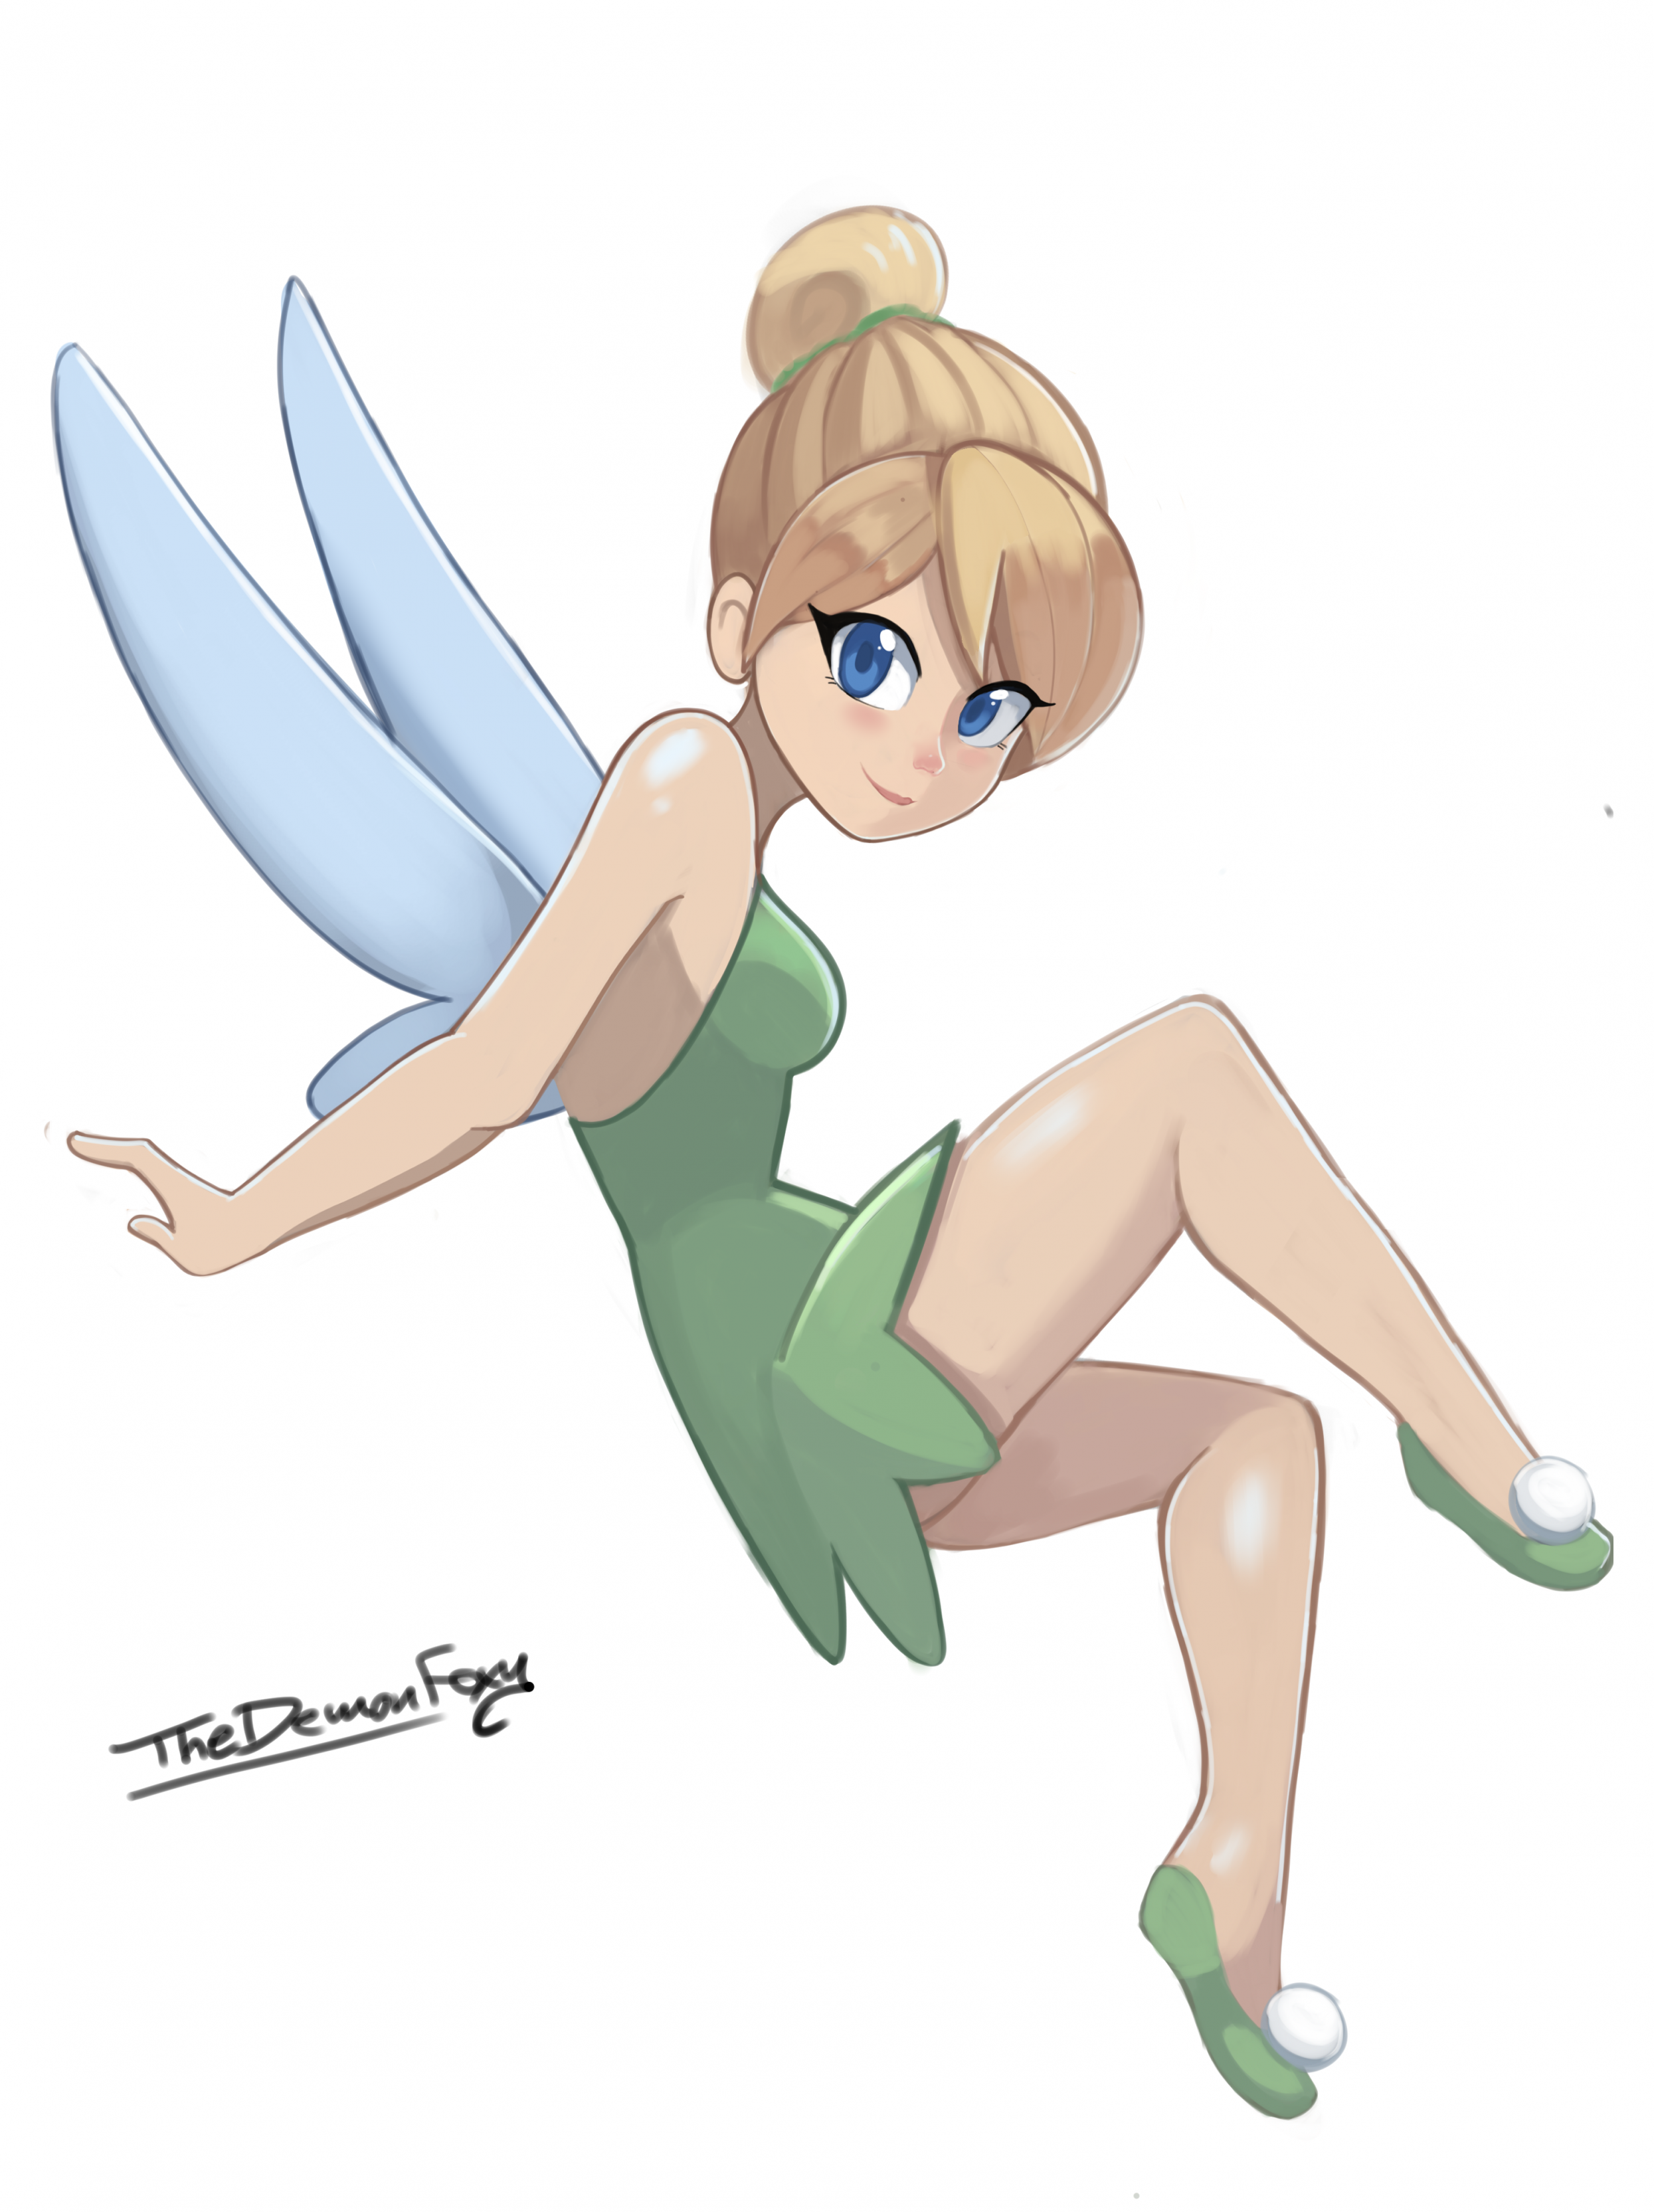 Tinker bell (Peter Pan) Disney, by YeiyeiArt - v2.0 Review | Civitai